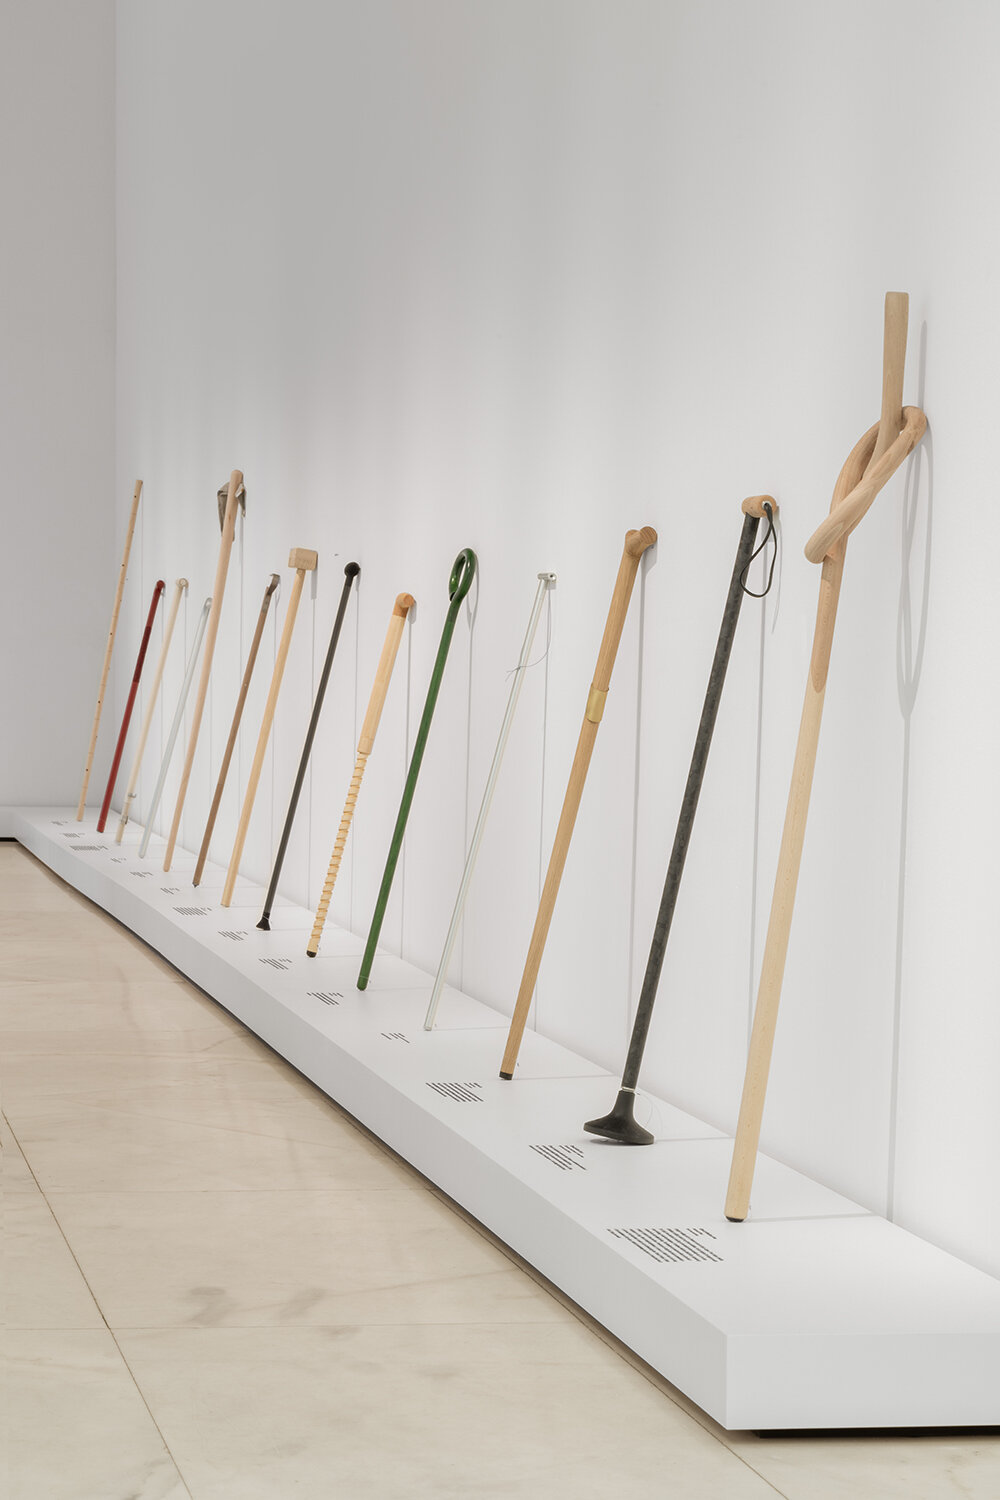 global designers explore the world of walking sticks and canes at milan triennale